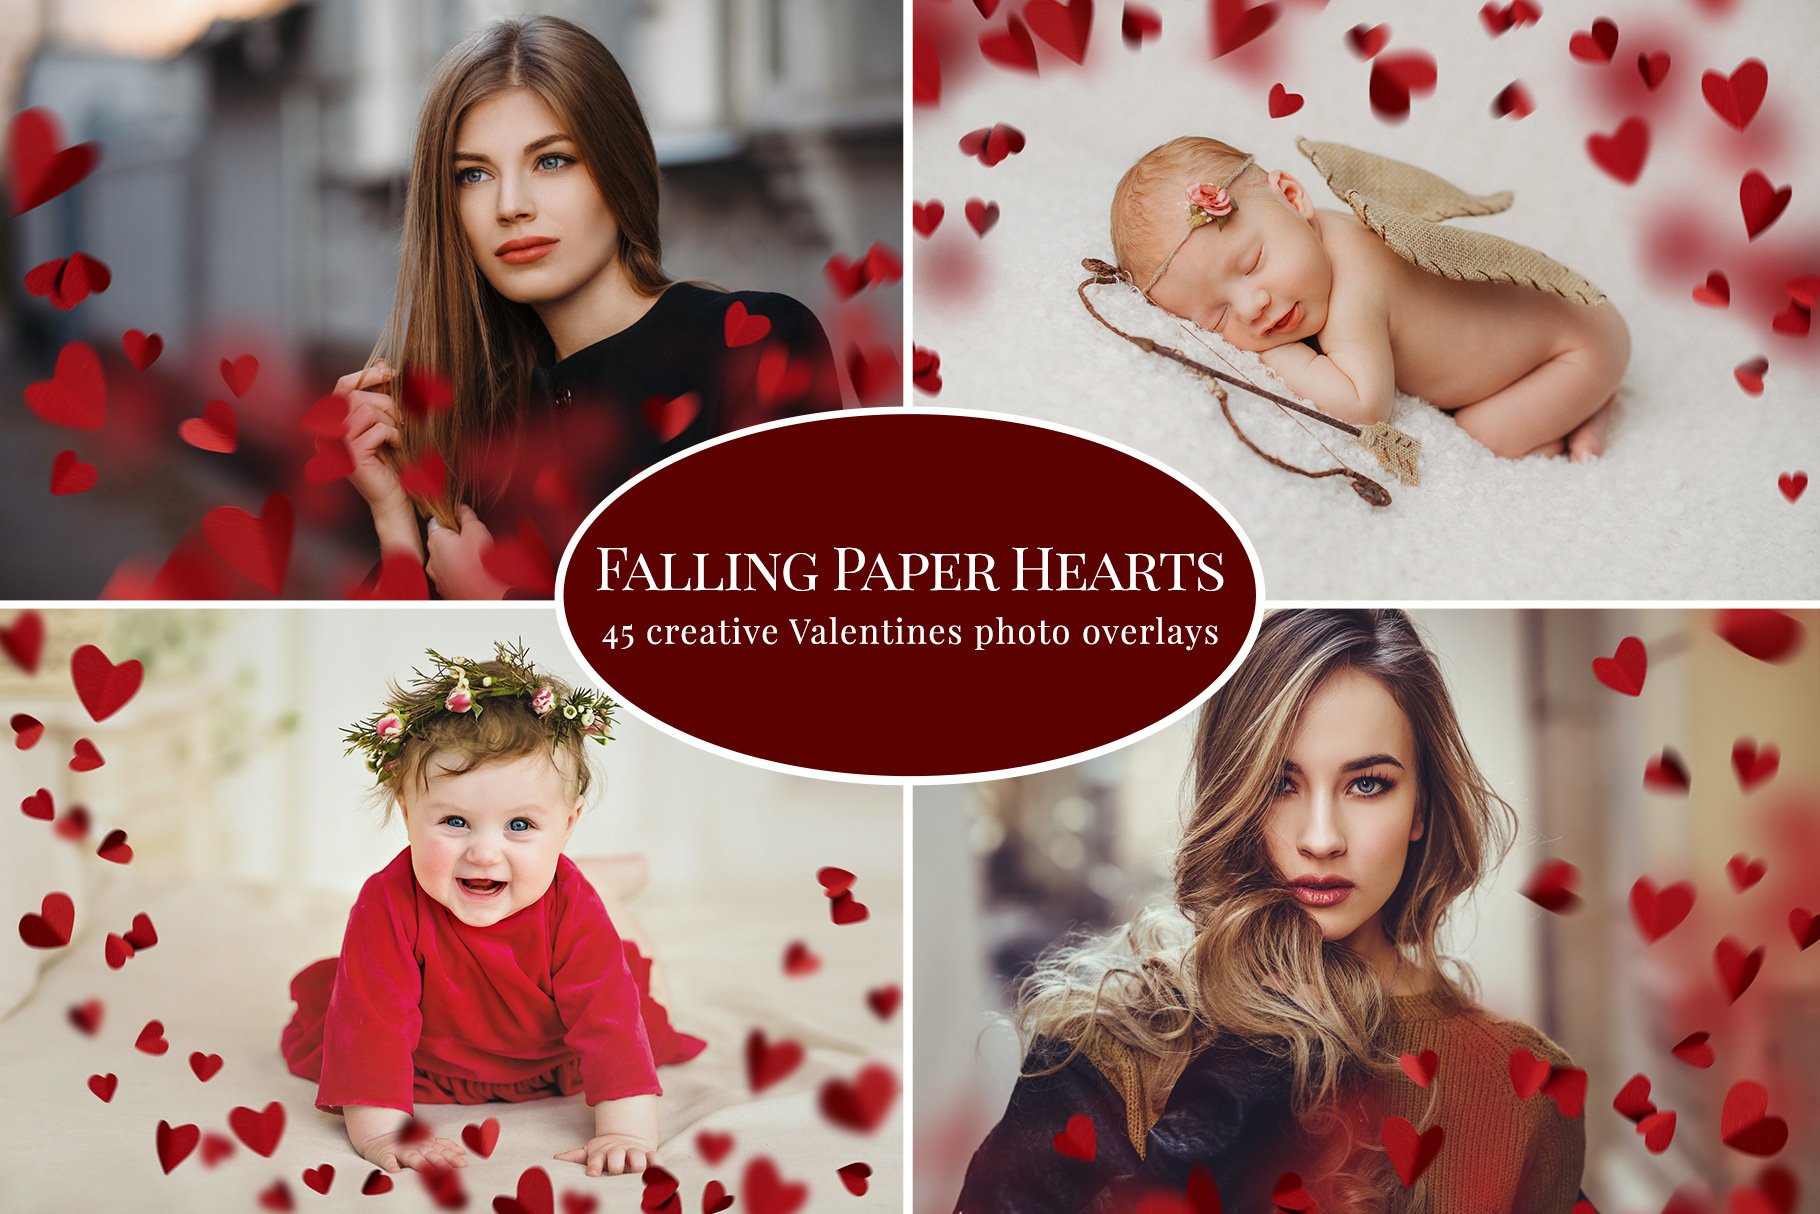 Falling Paper Hearts photo overlayscover image.